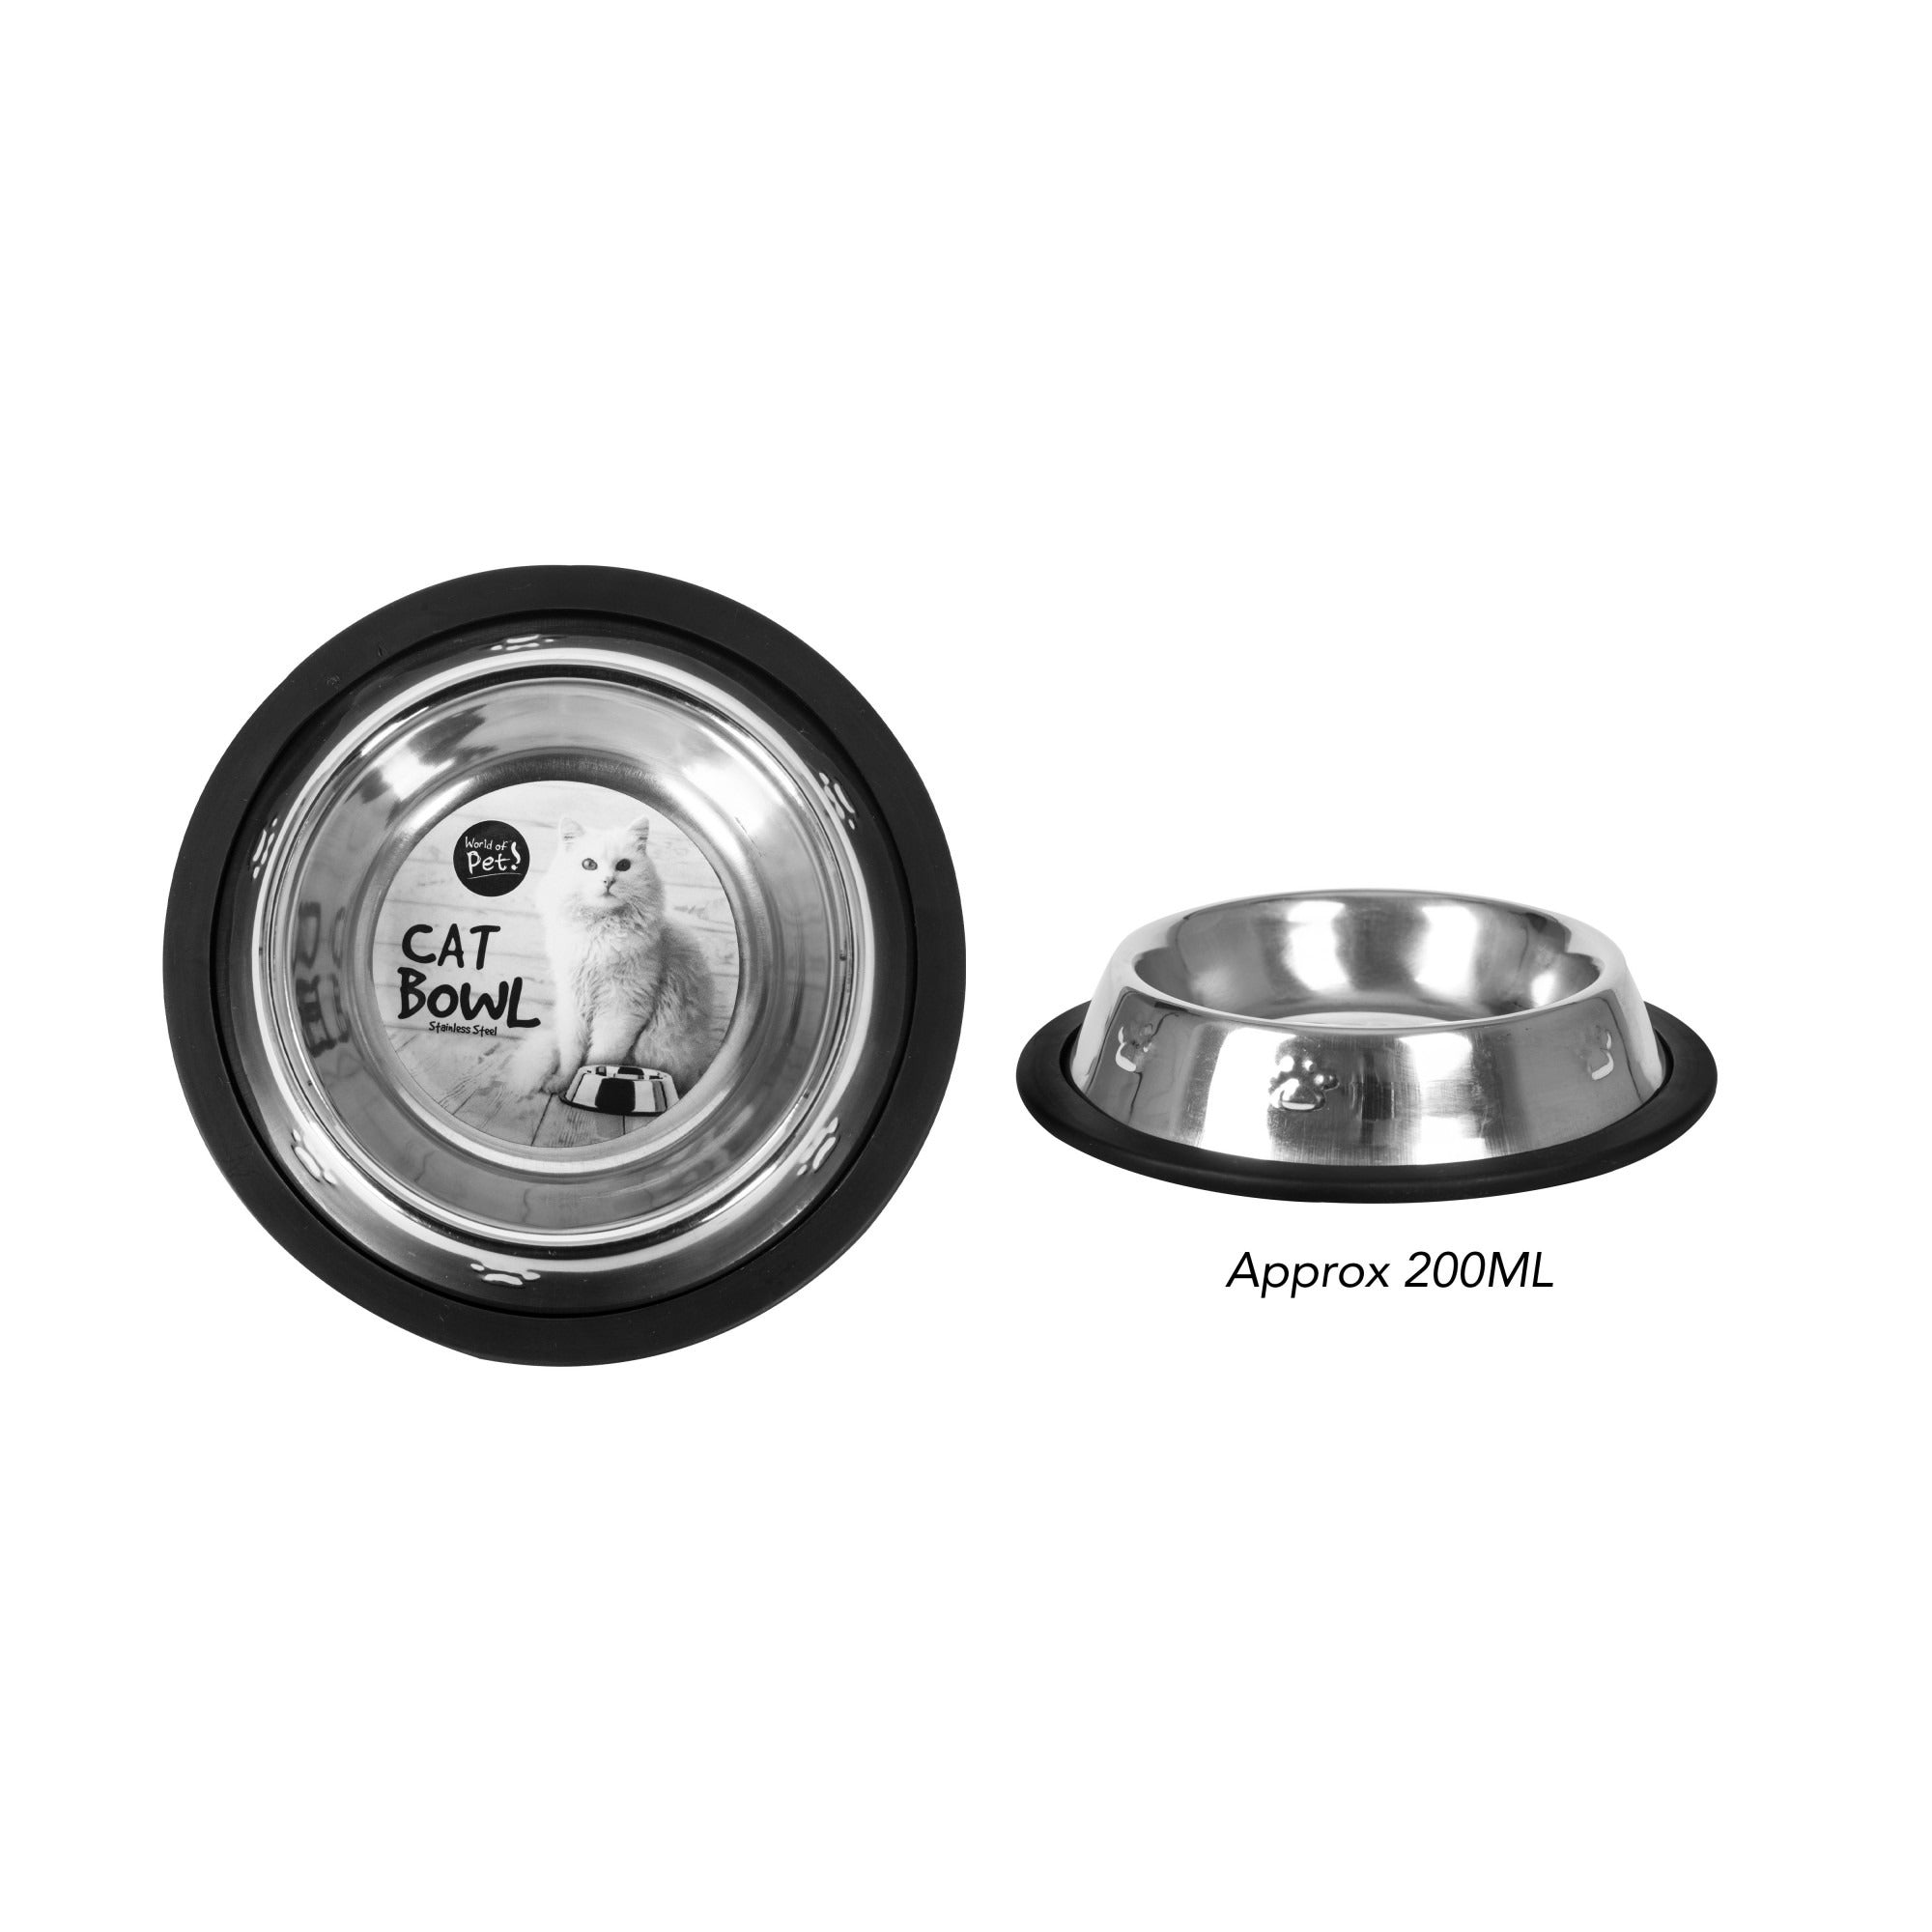 View Stainless Steel Cat Bowl 15cm 200ml information